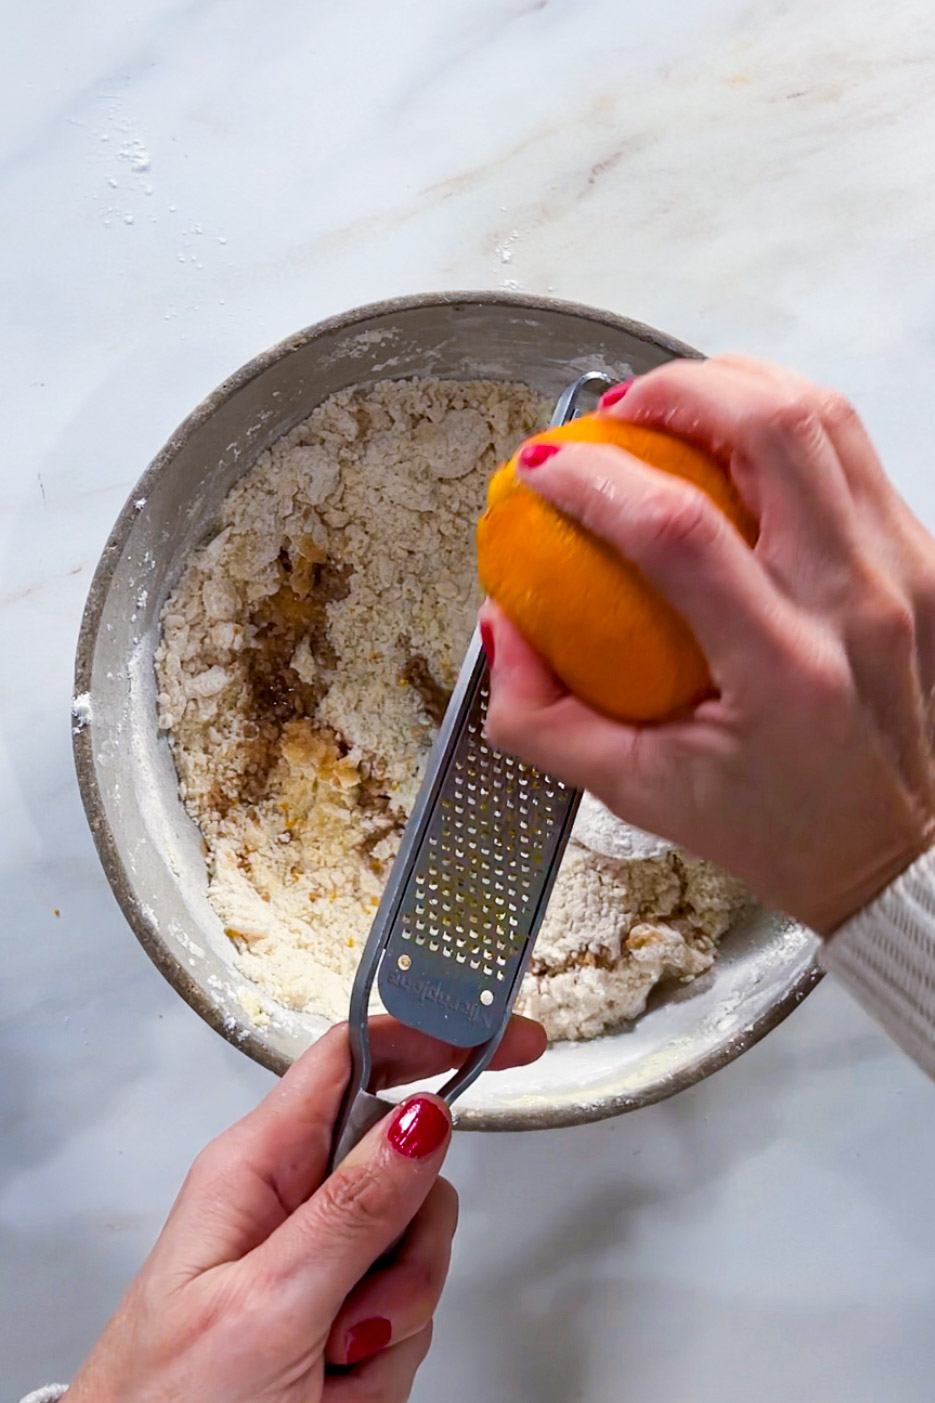 A person grating an orange into a bowl of flour to make Day of the Dead cookies.